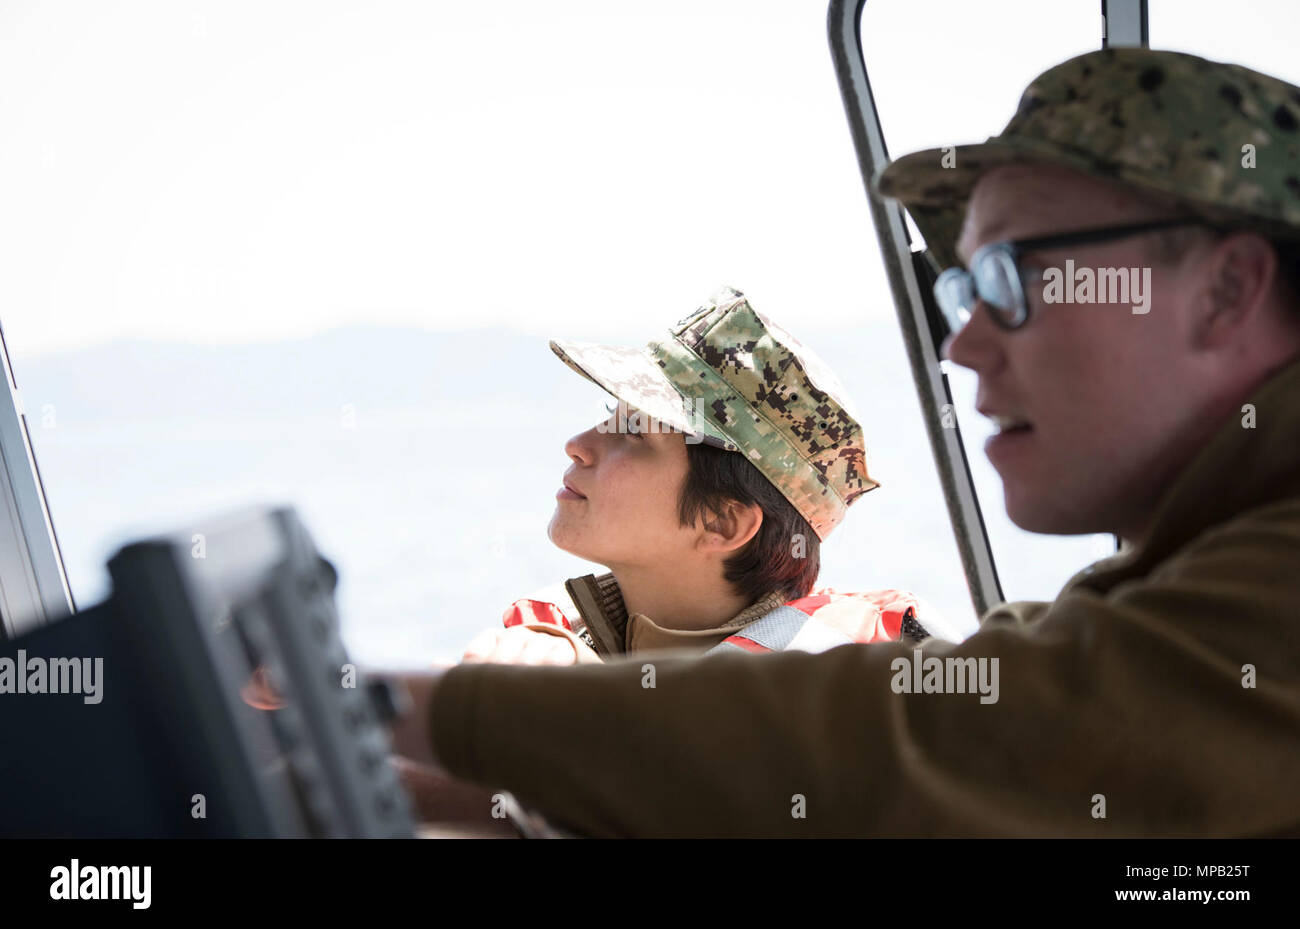 POHANG, Republic of Korea (April 7, 2017) – Hospital Corpsman 2nd Class Tyler Allen (right) and Engineman 3rd Class Giovanna Macias (left), attached to Assault Craft Unit 1, watch crafts being lowered from USNS Pililaau (T-AKR 304) during Operation Pacific Reach Exercise 2017 (OPRex17). OPRex17 is a bilateral training event designed to ensure readiness and sustain the ROK-U.S. Alliance by exercising an Area Distribution Center (ADC), an Air Terminal Supply Point (ATSP), Combined Joint Logistics Over-the-Shore (CJLOTS), and the use of rail, inland waterways, and coastal lift operations to valid Stock Photo